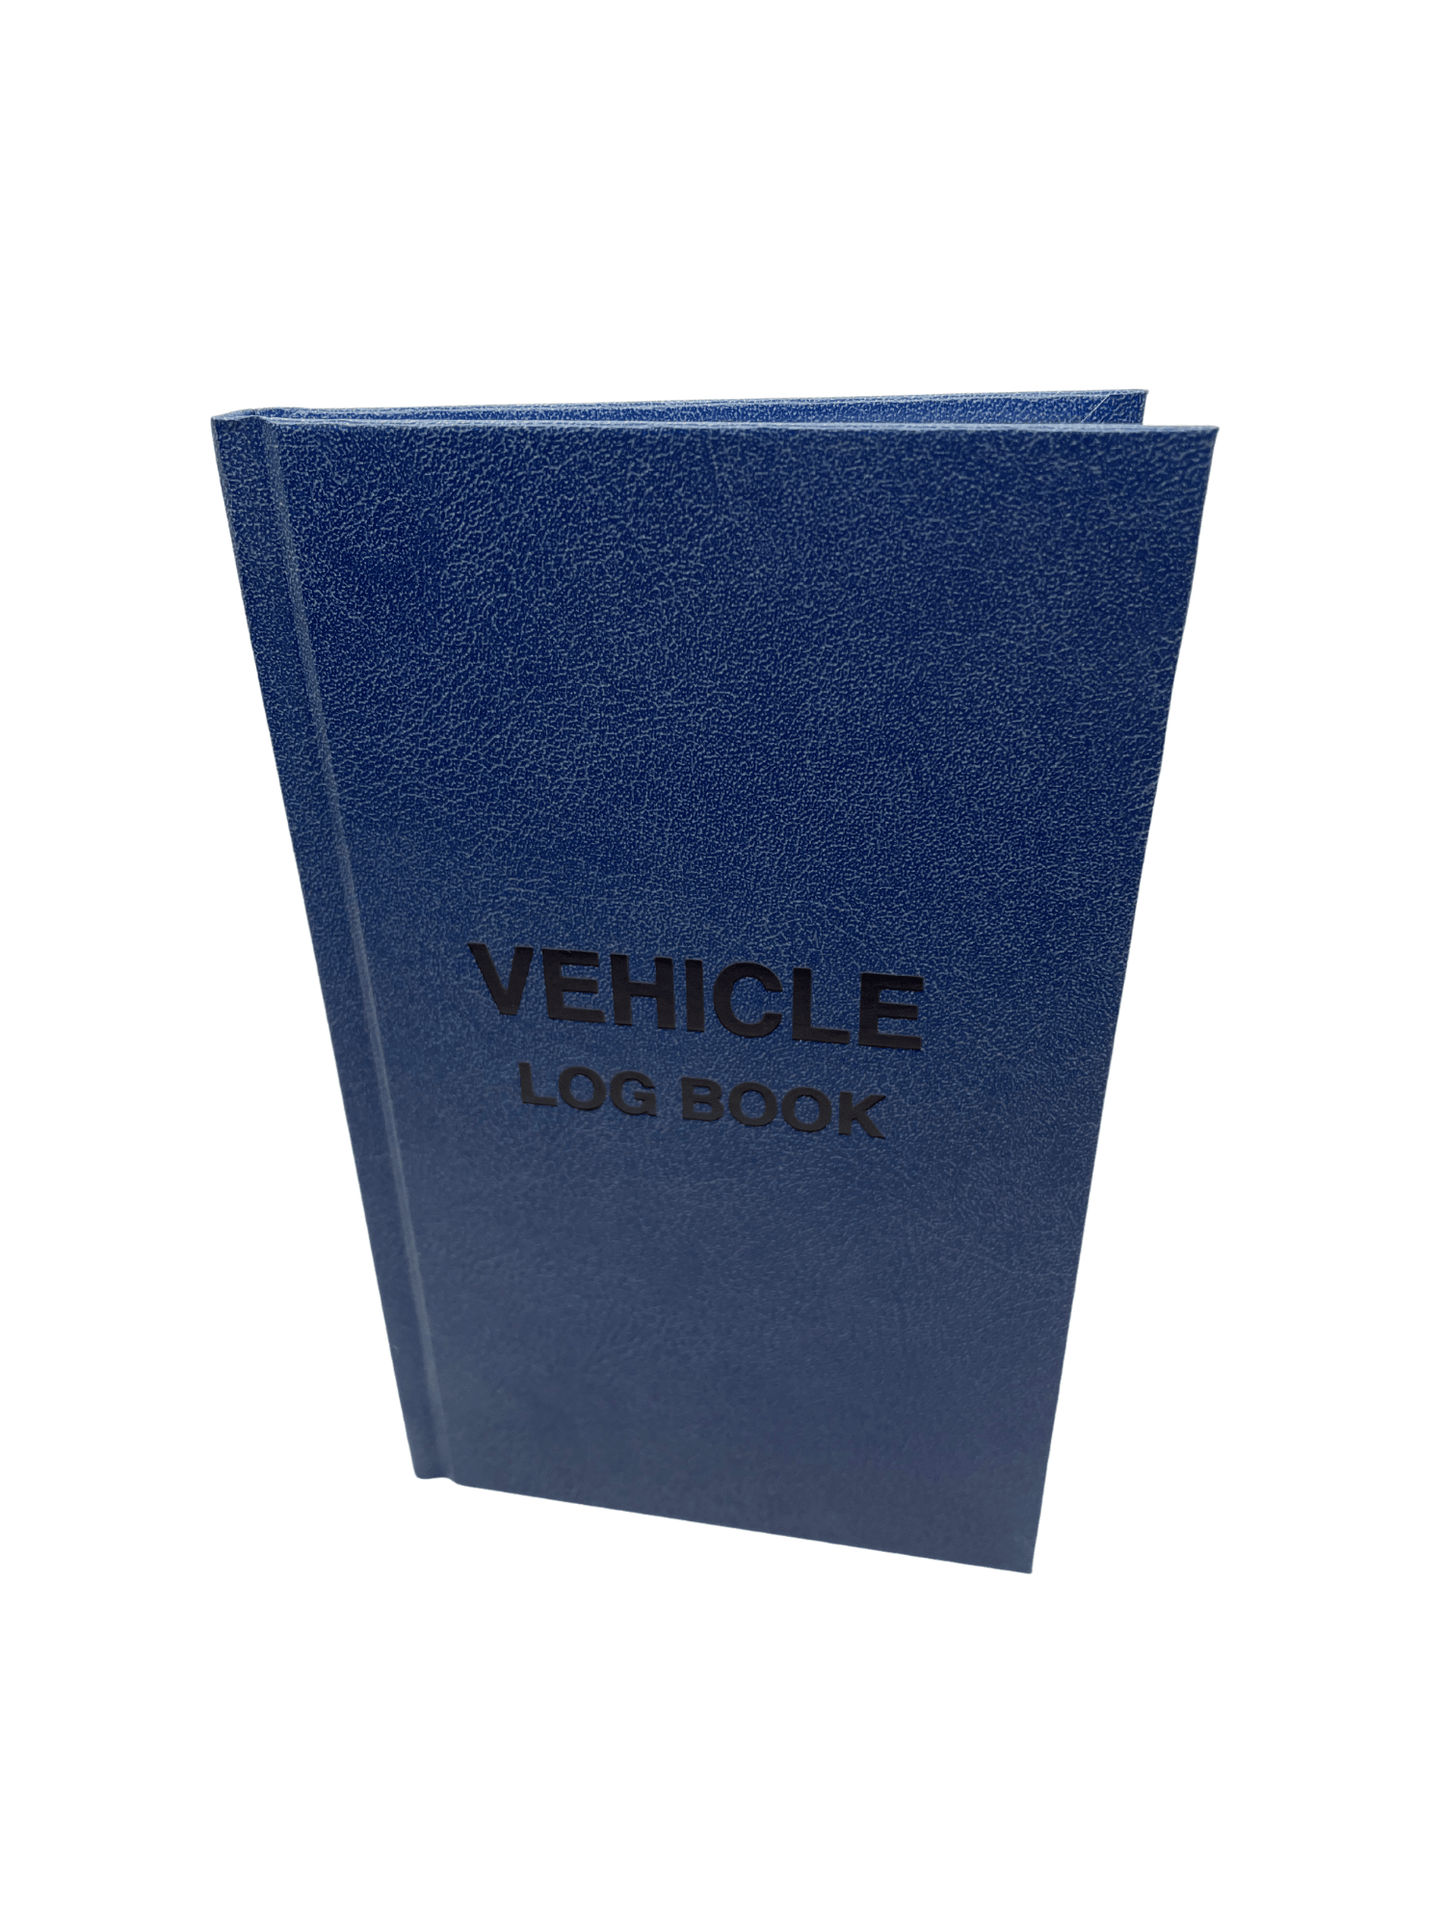 a blue log book with black text stating "vehicle log book"